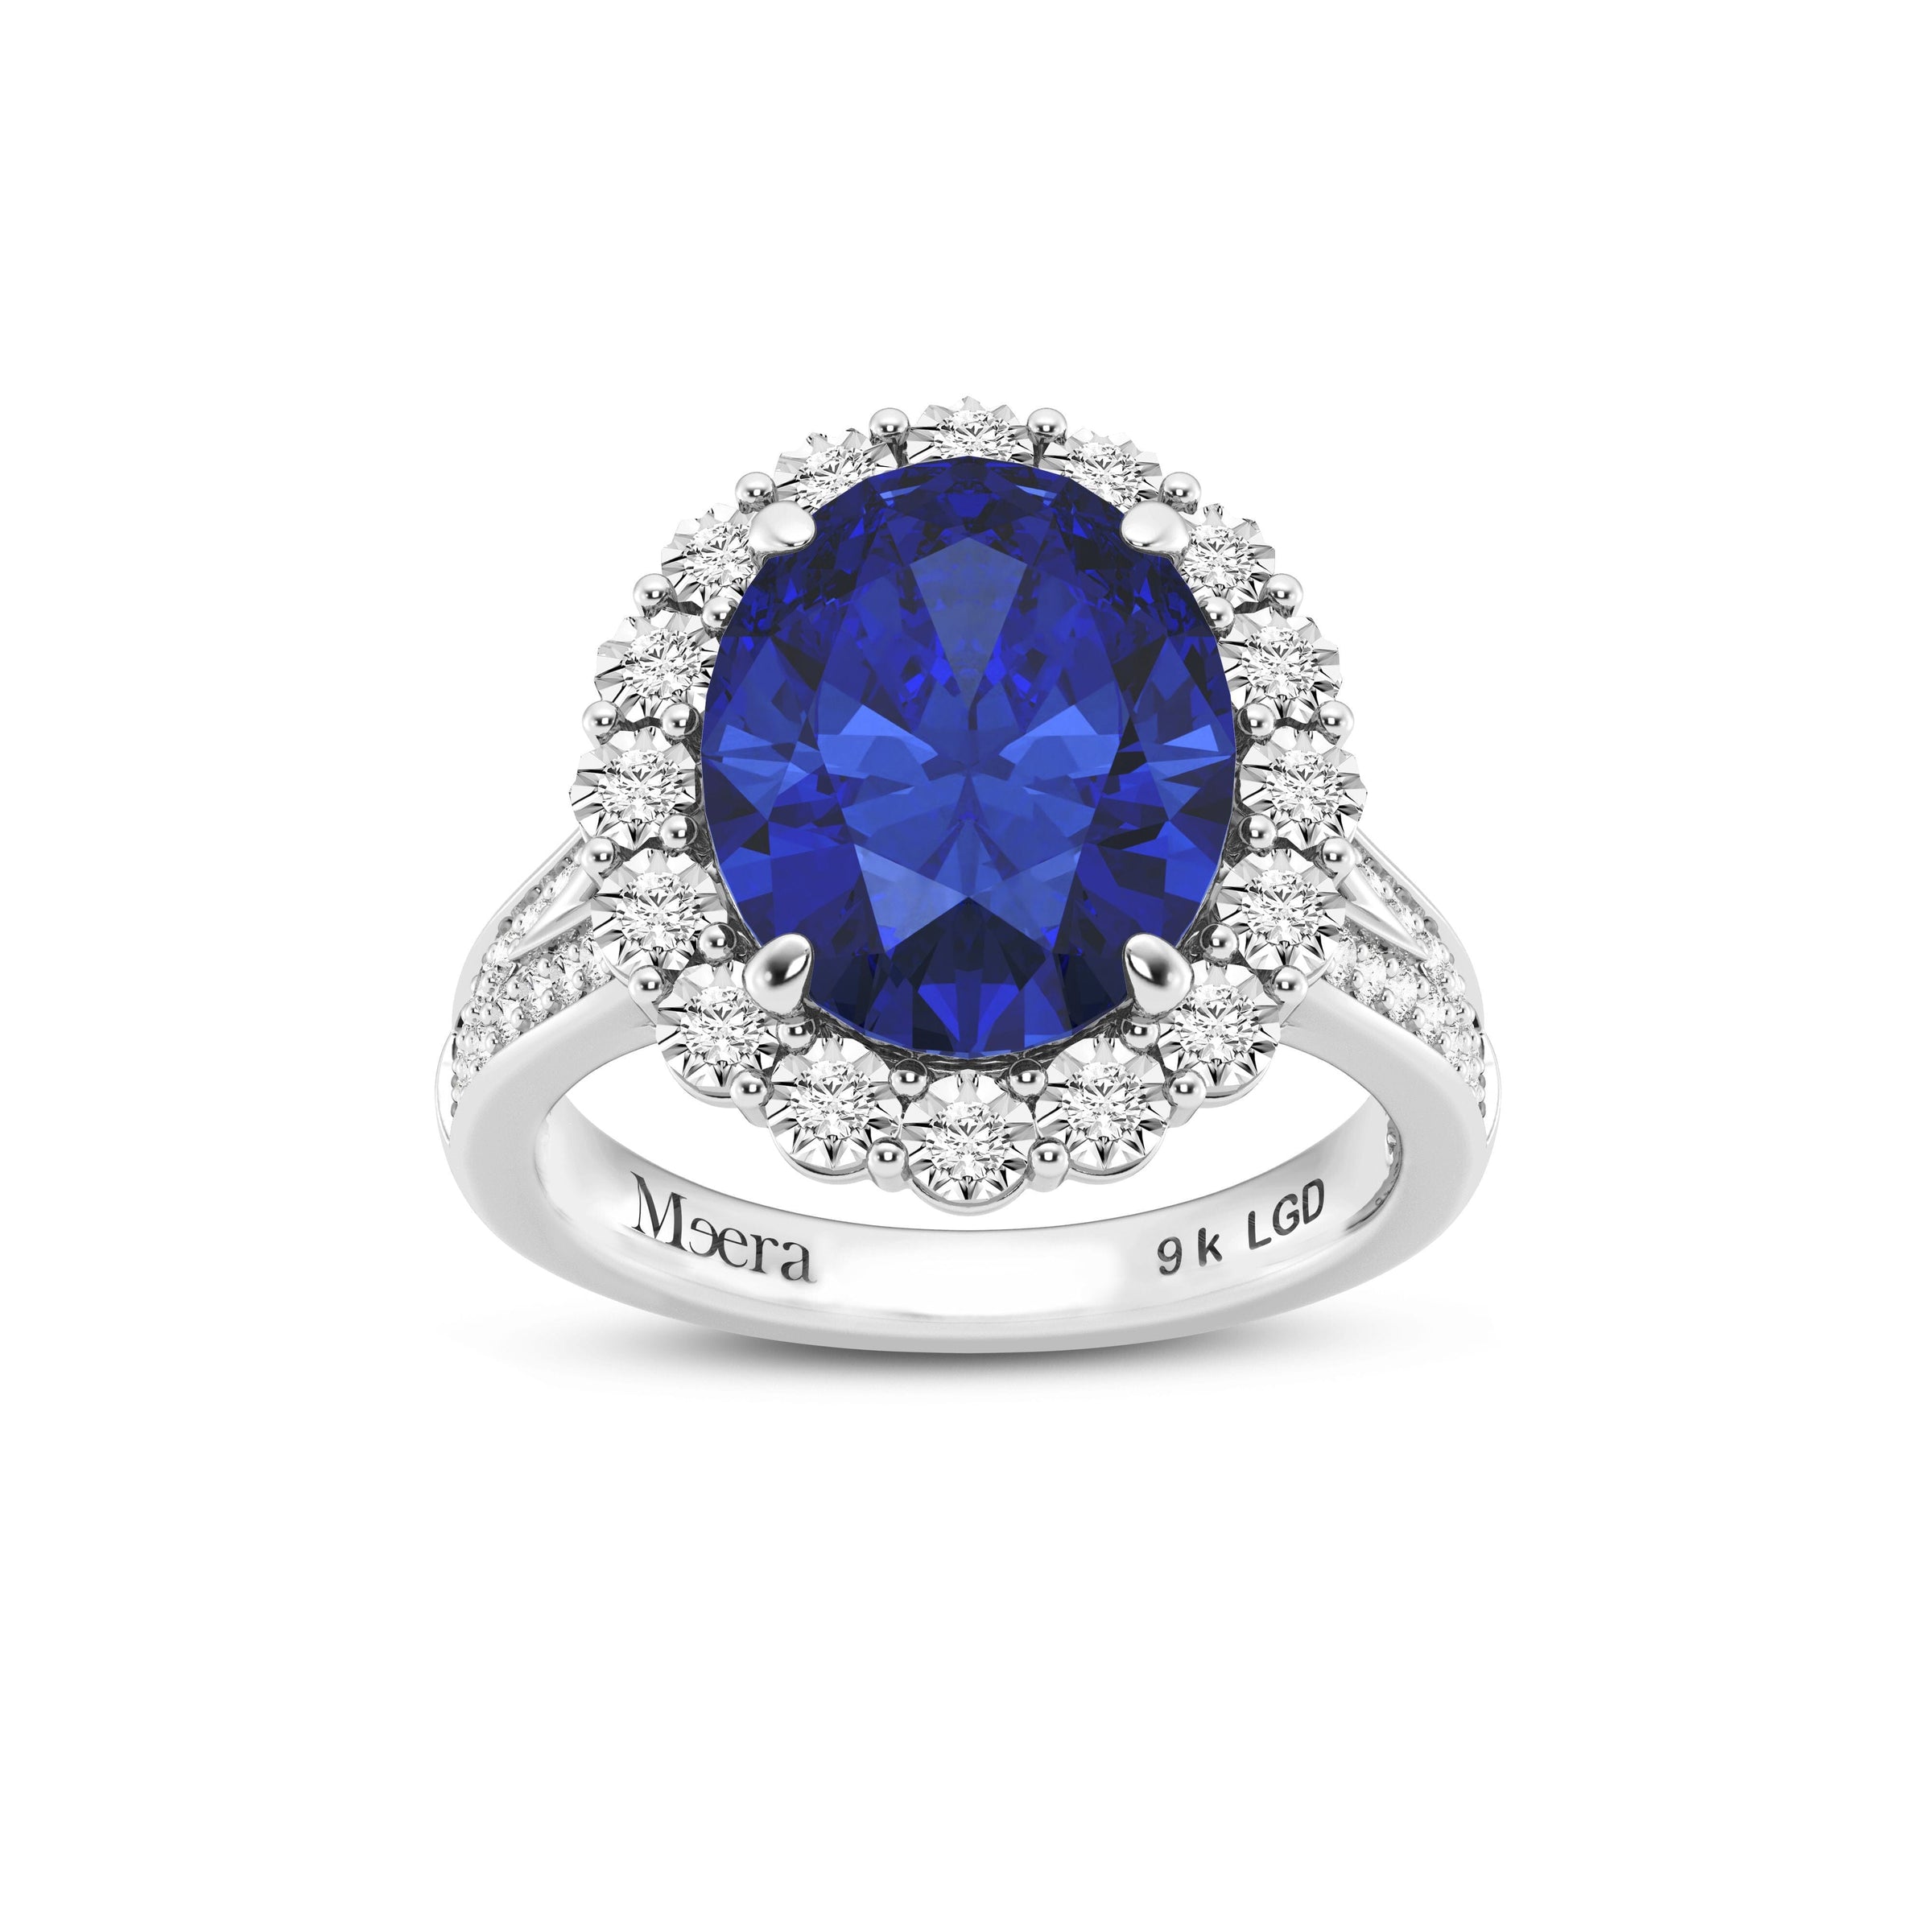 Meera Laboratory Grown Ceylon Sapphire Ring with 1/2ct of Laboratory Grown Diamonds in 9ct White Gold Rings Bevilles 